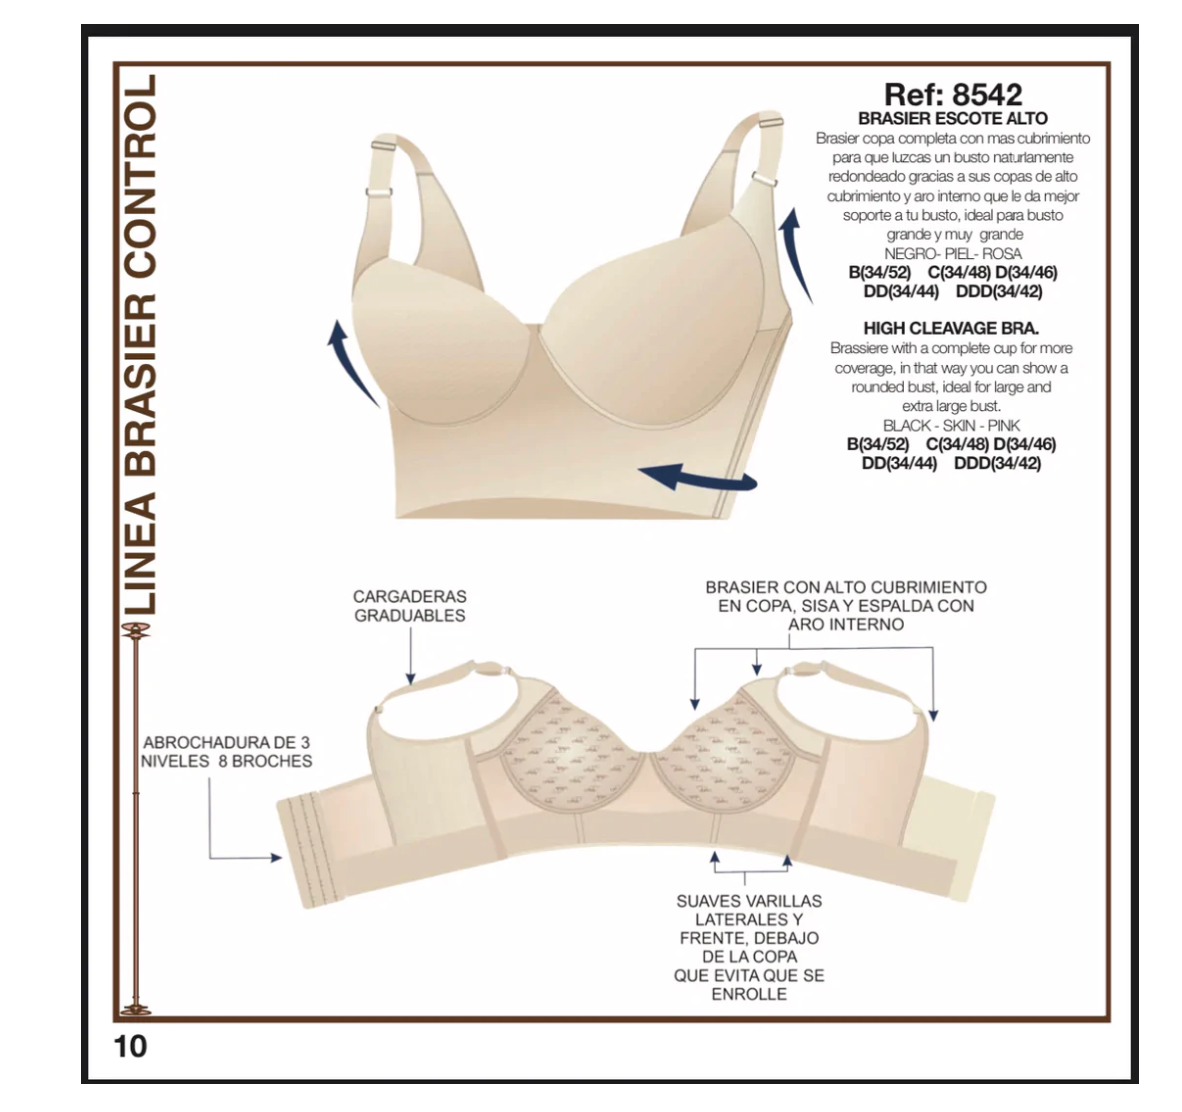 Full coverage push-up bra with control (UpLady 8532)